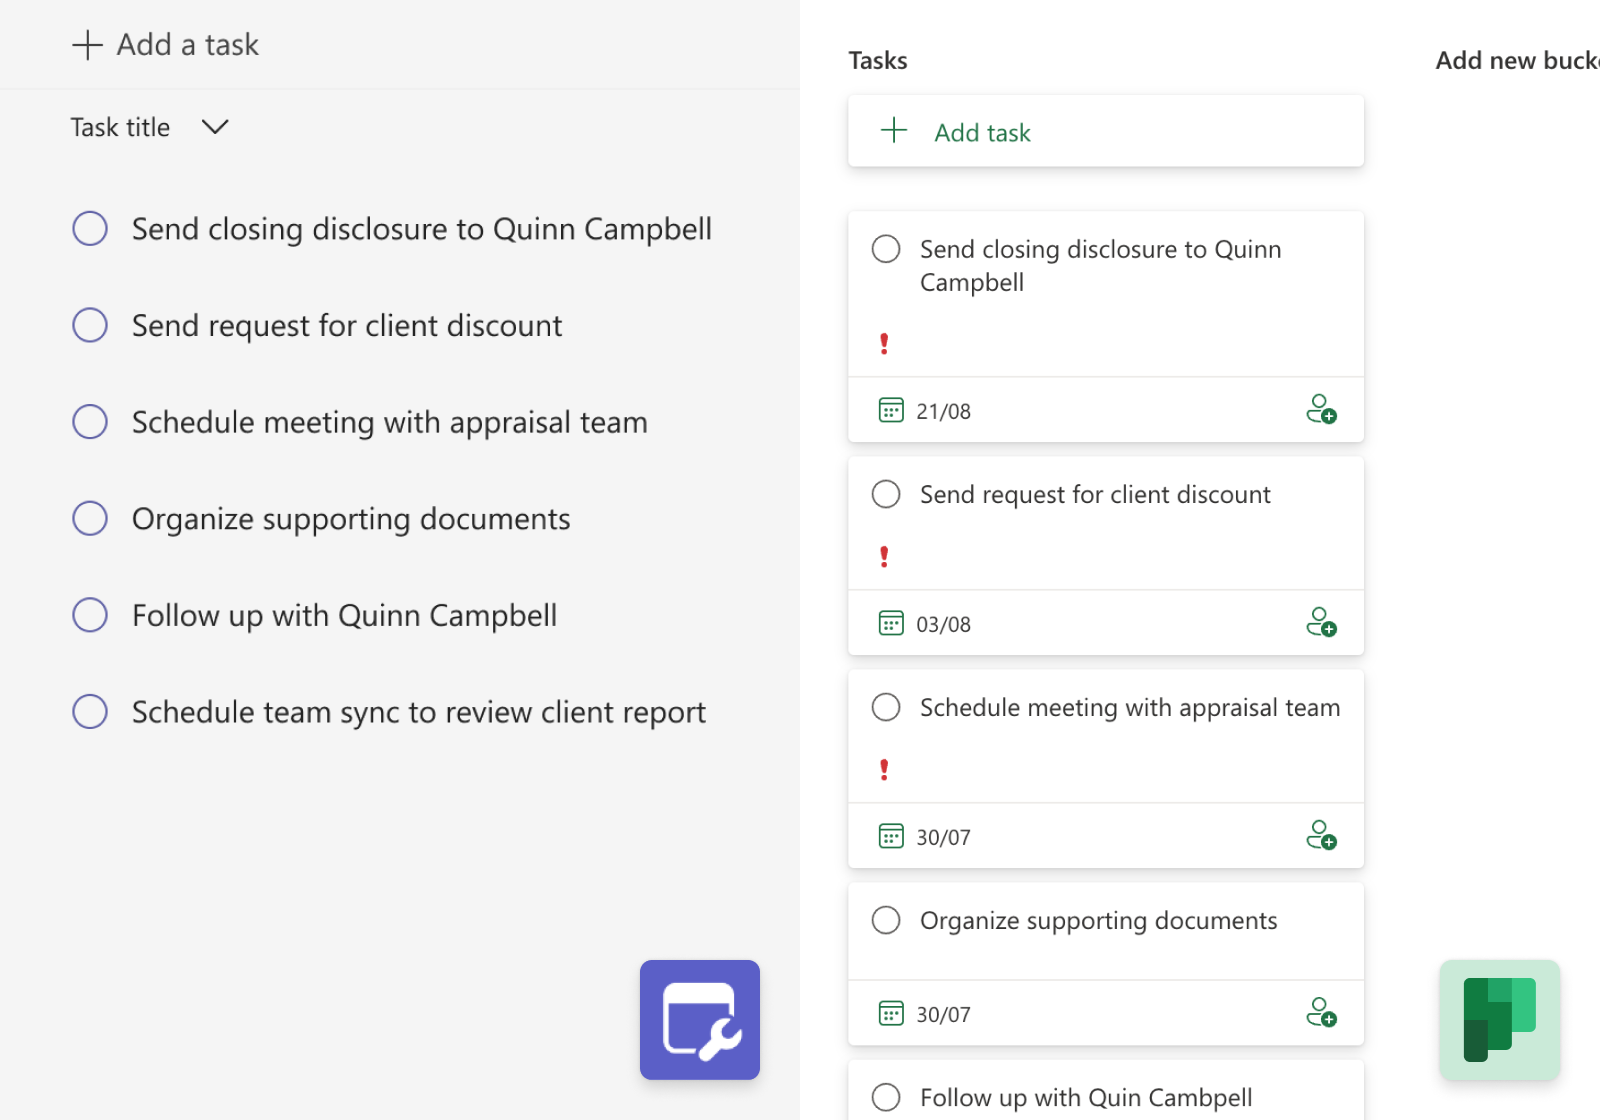 Tasks created in the Tasks control, visible in Planner